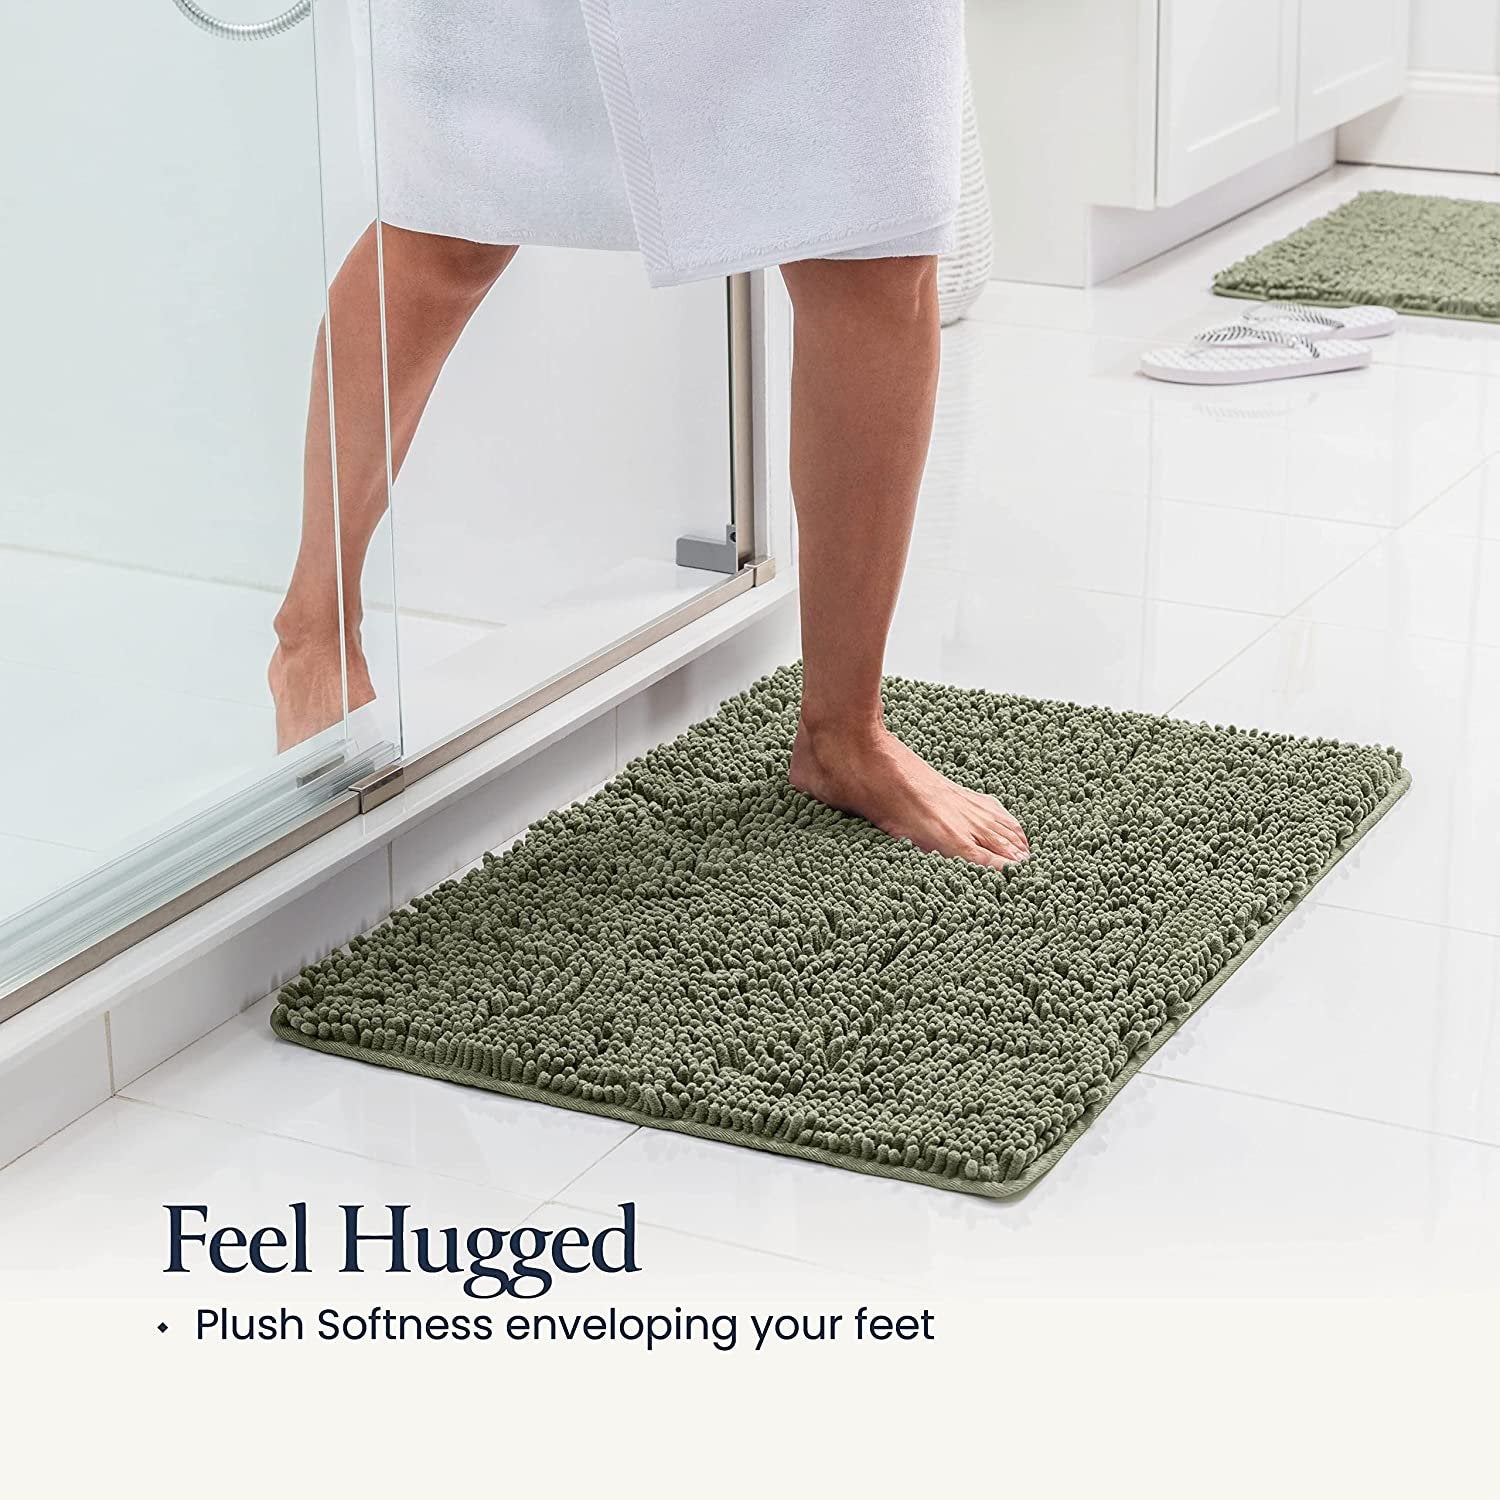 BELADOR Sage Green 2pc Bathroom Rug Set - Soft Plush Chenille Bath Mats, Durable with Rubber Backing, Ultra Absorbent, 30x20 + 24x17 Inch Size